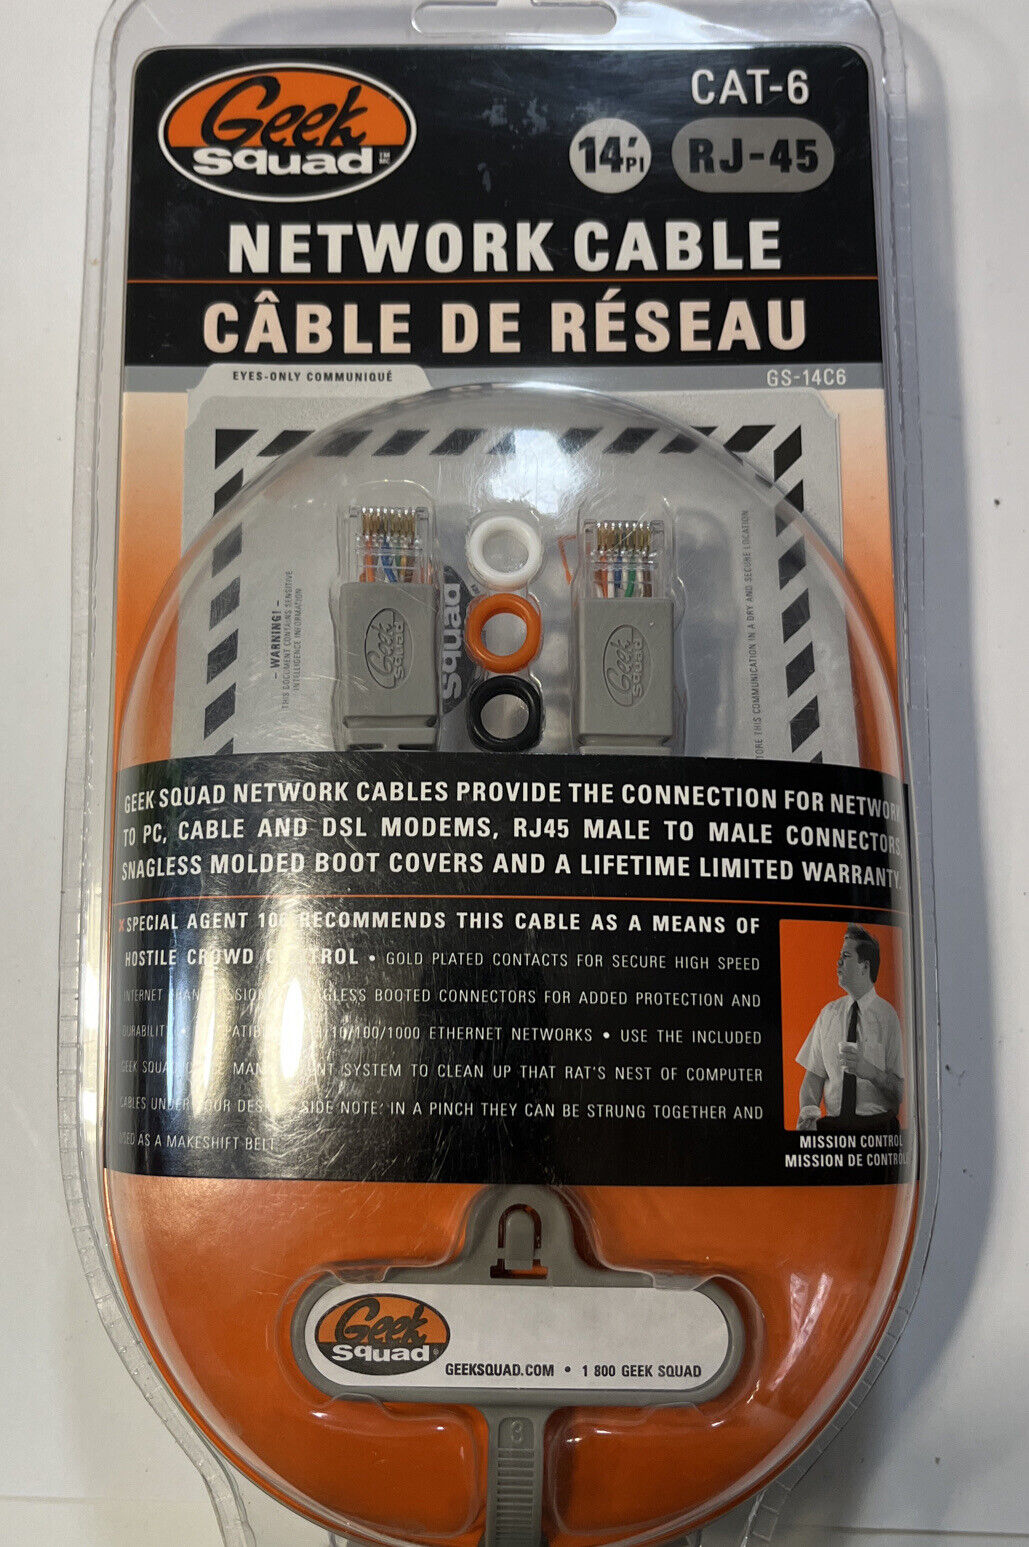 Geek Squad 14 Foot CAT-6 RJ-45 Network Cable New in Sealed Package GS-14C6